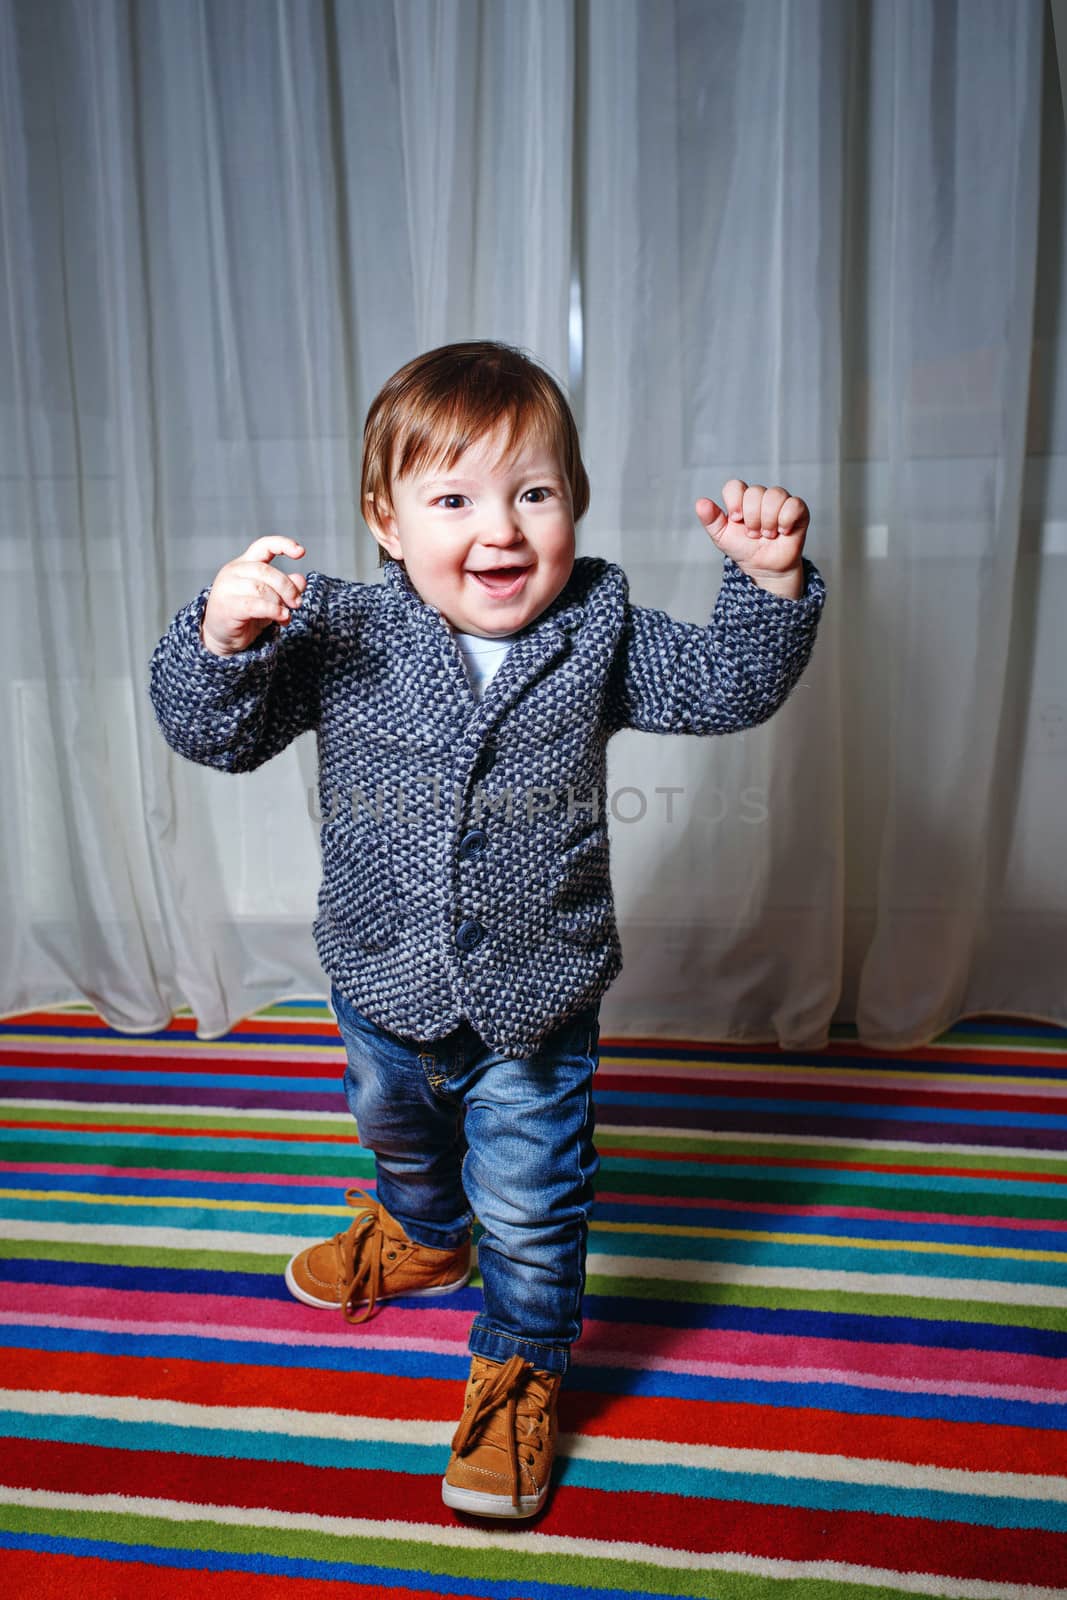 Little boy in a single-breasted jacket and jeans held up his hands in a moment of joy